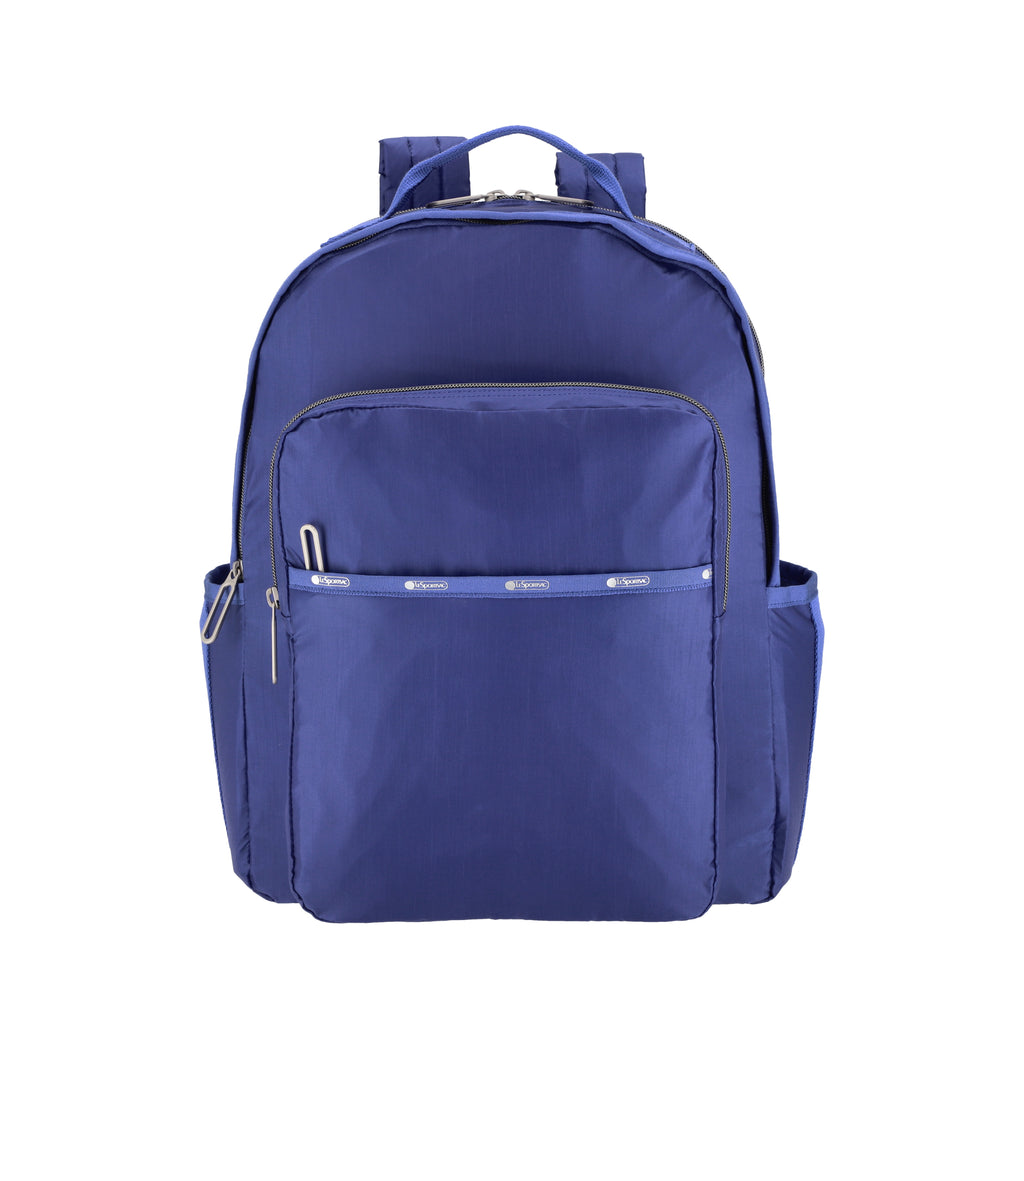 Essential Carryall Backpack - 25363880640560